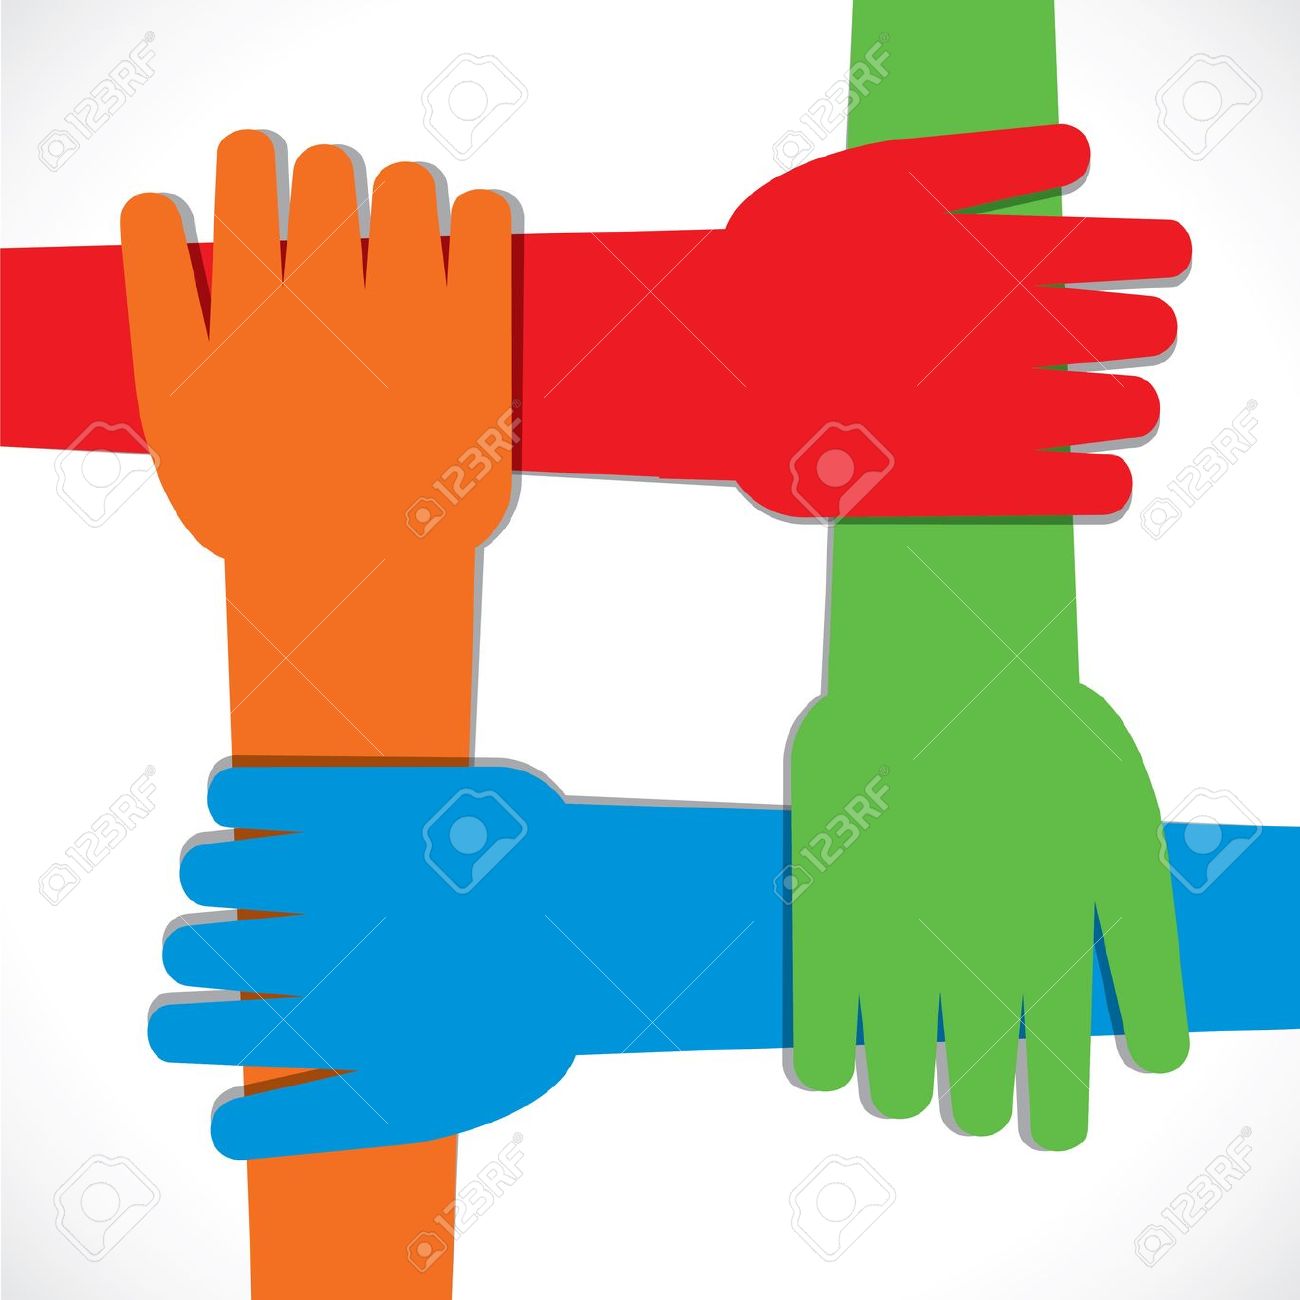 people joining hands together